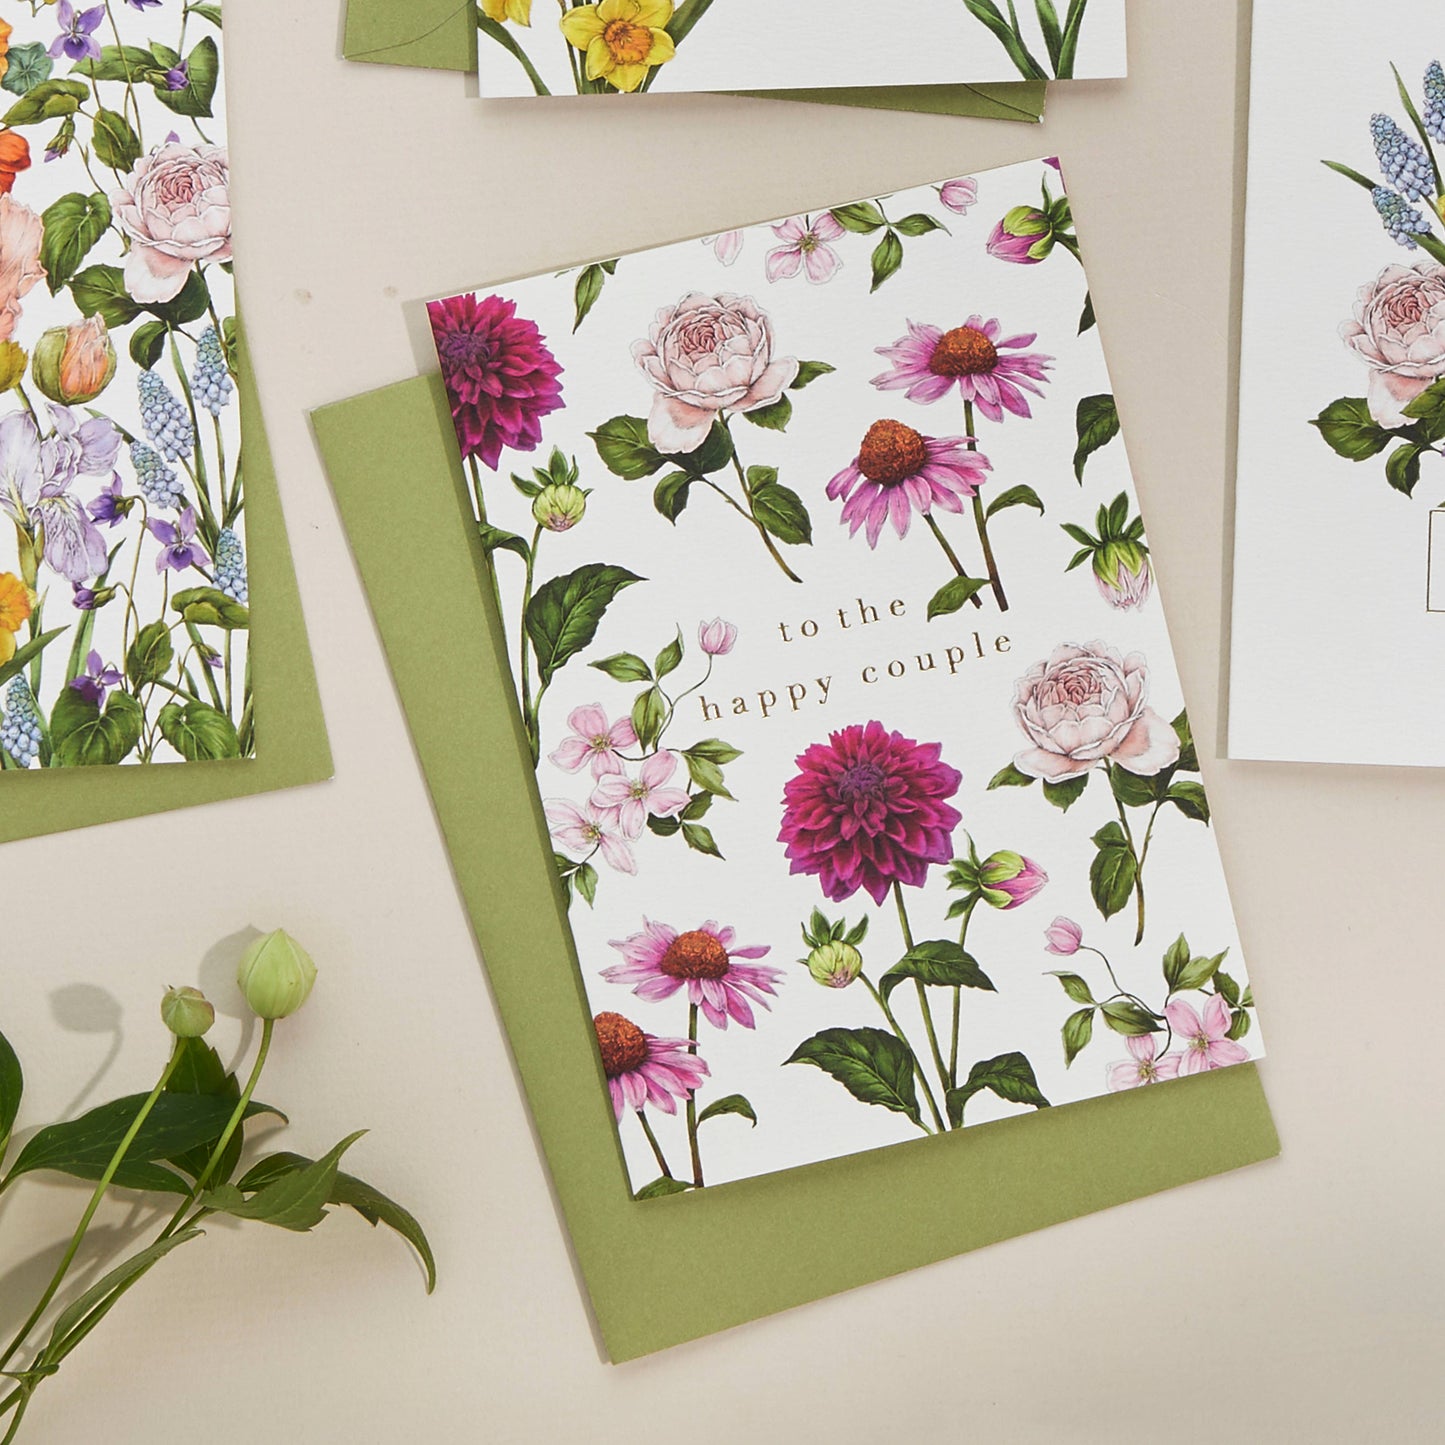 Bountiful Blooms To the happy couple Card